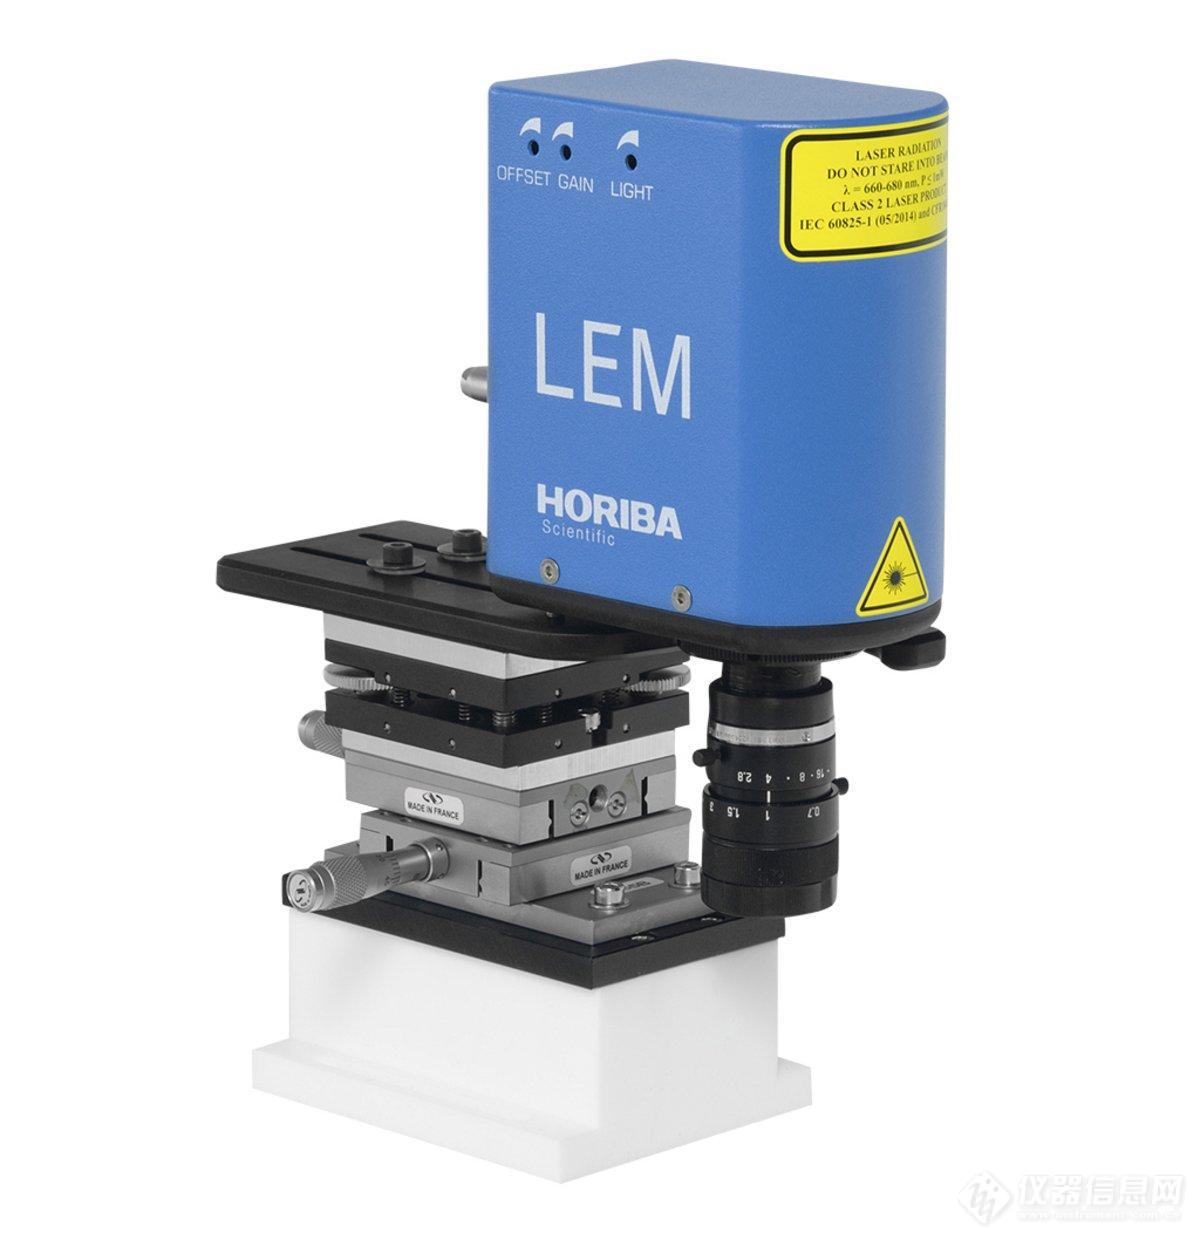 LEM-Series-Camera-Endpoint-Monitor-Picture.jpg